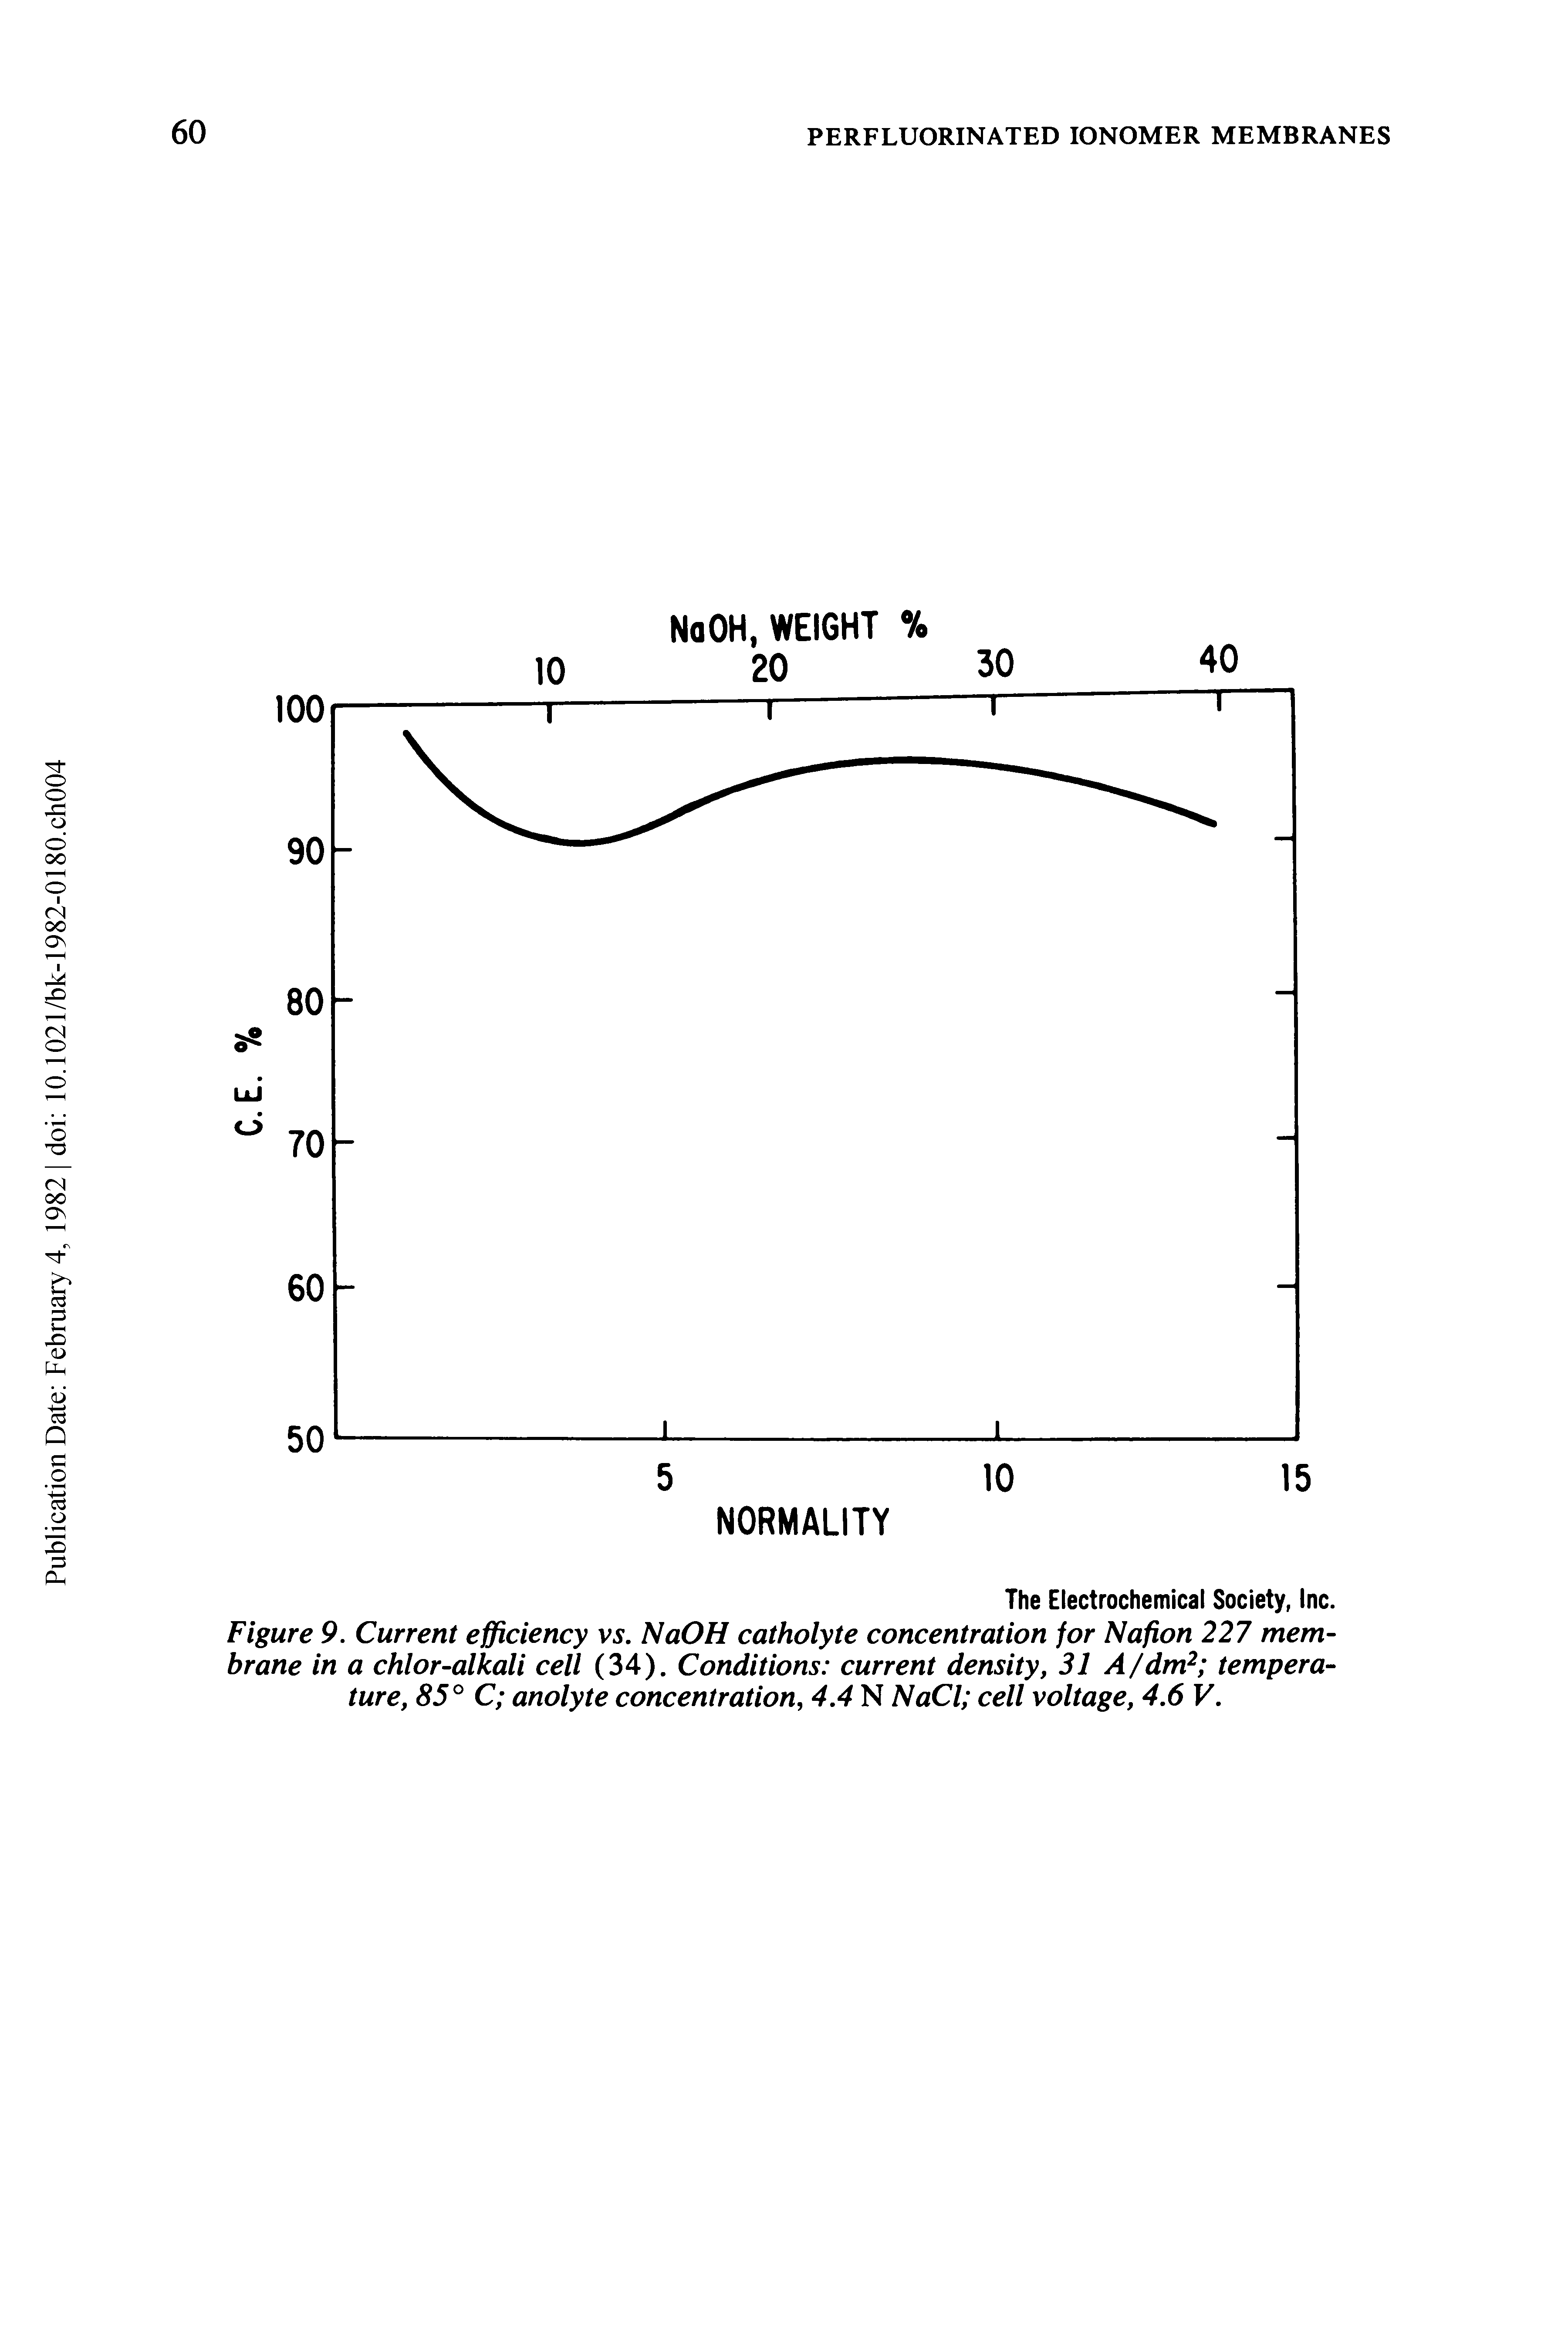 Figure 9. Current efficiency vs. NaOH catholyte concentration for Nafion 227 membrane in a chlor-alkali cell (34). Conditions current density, 31 A/dm2 temperature, 85° C anolyte concentration, 4.4 N NaCl cell voltage, 4.6 V.